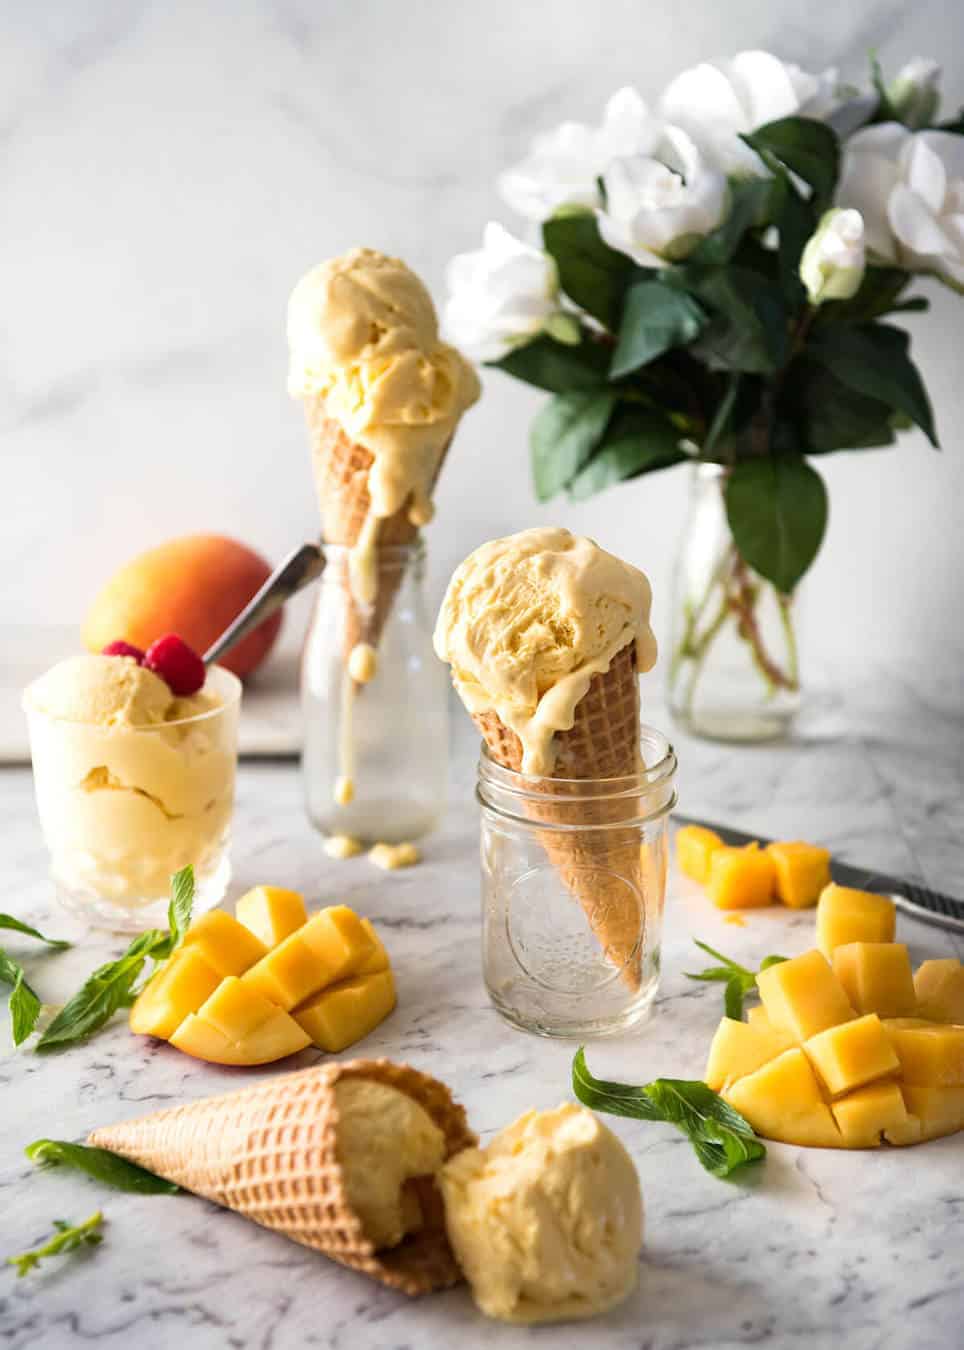 Homemade mango ice-cream in ice cream cones and in cups, with cheeks of cut mango on the side.